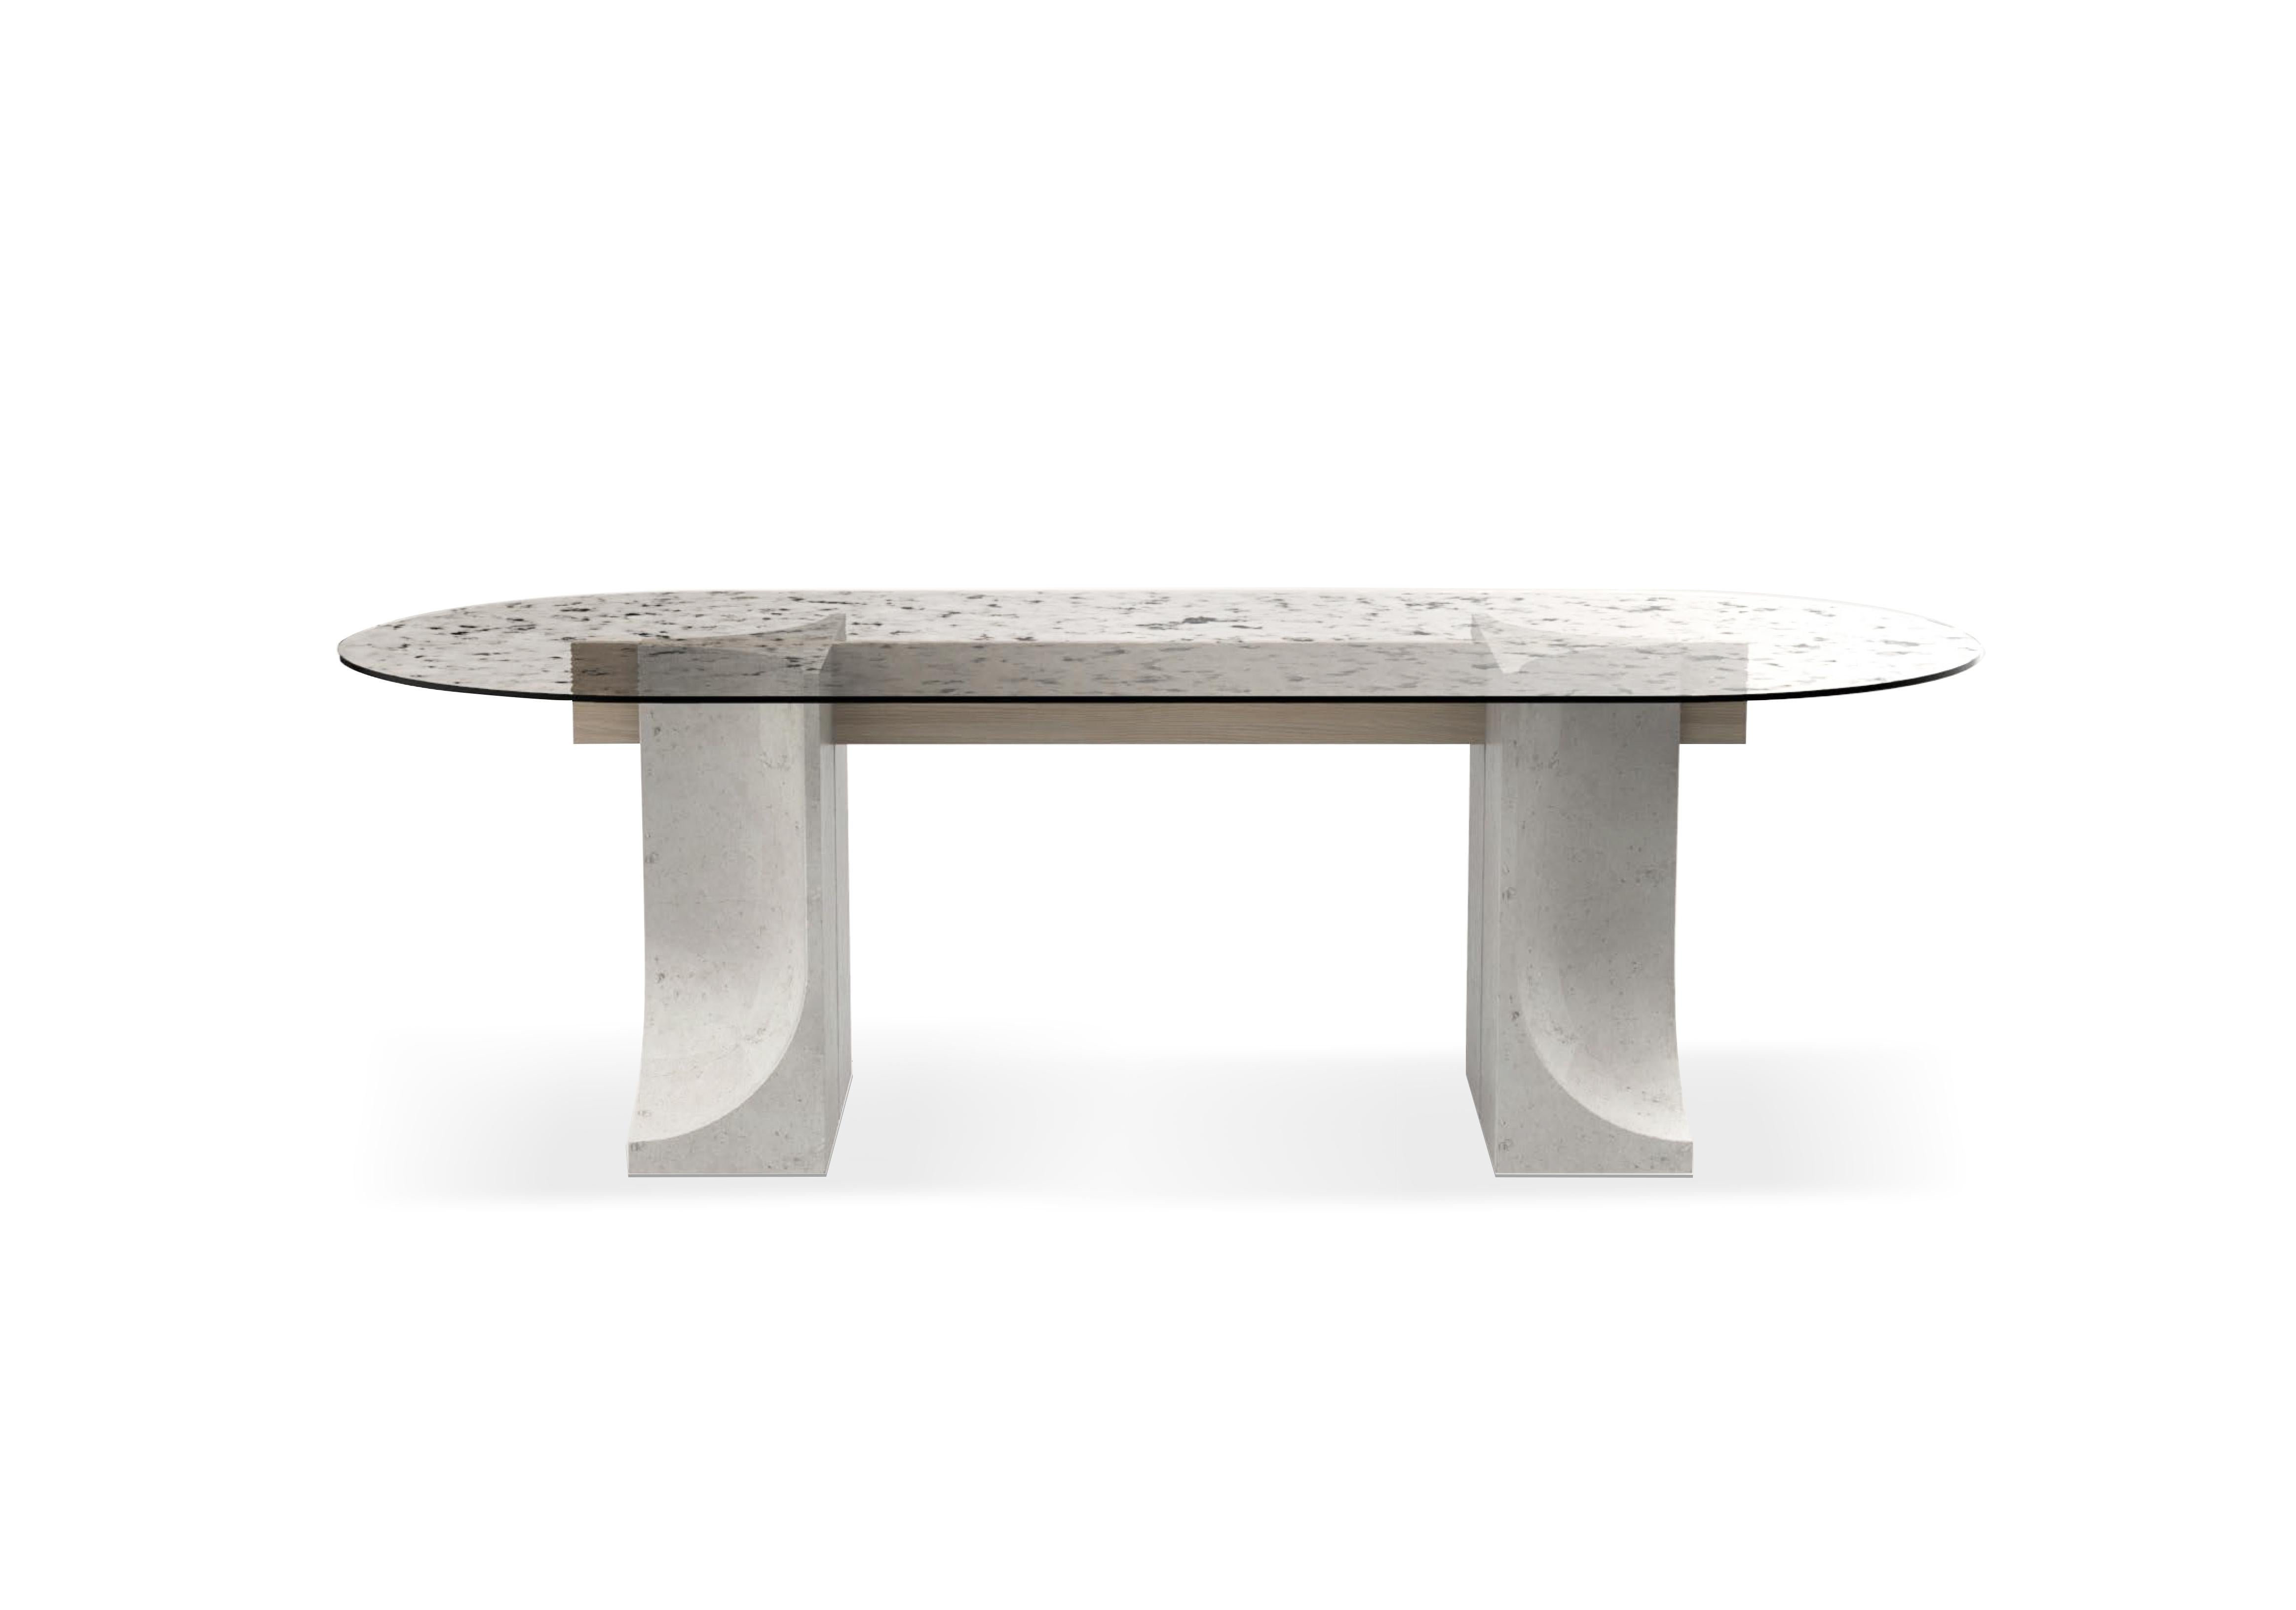 Portuguese Unique Edge Dining Table by Collector